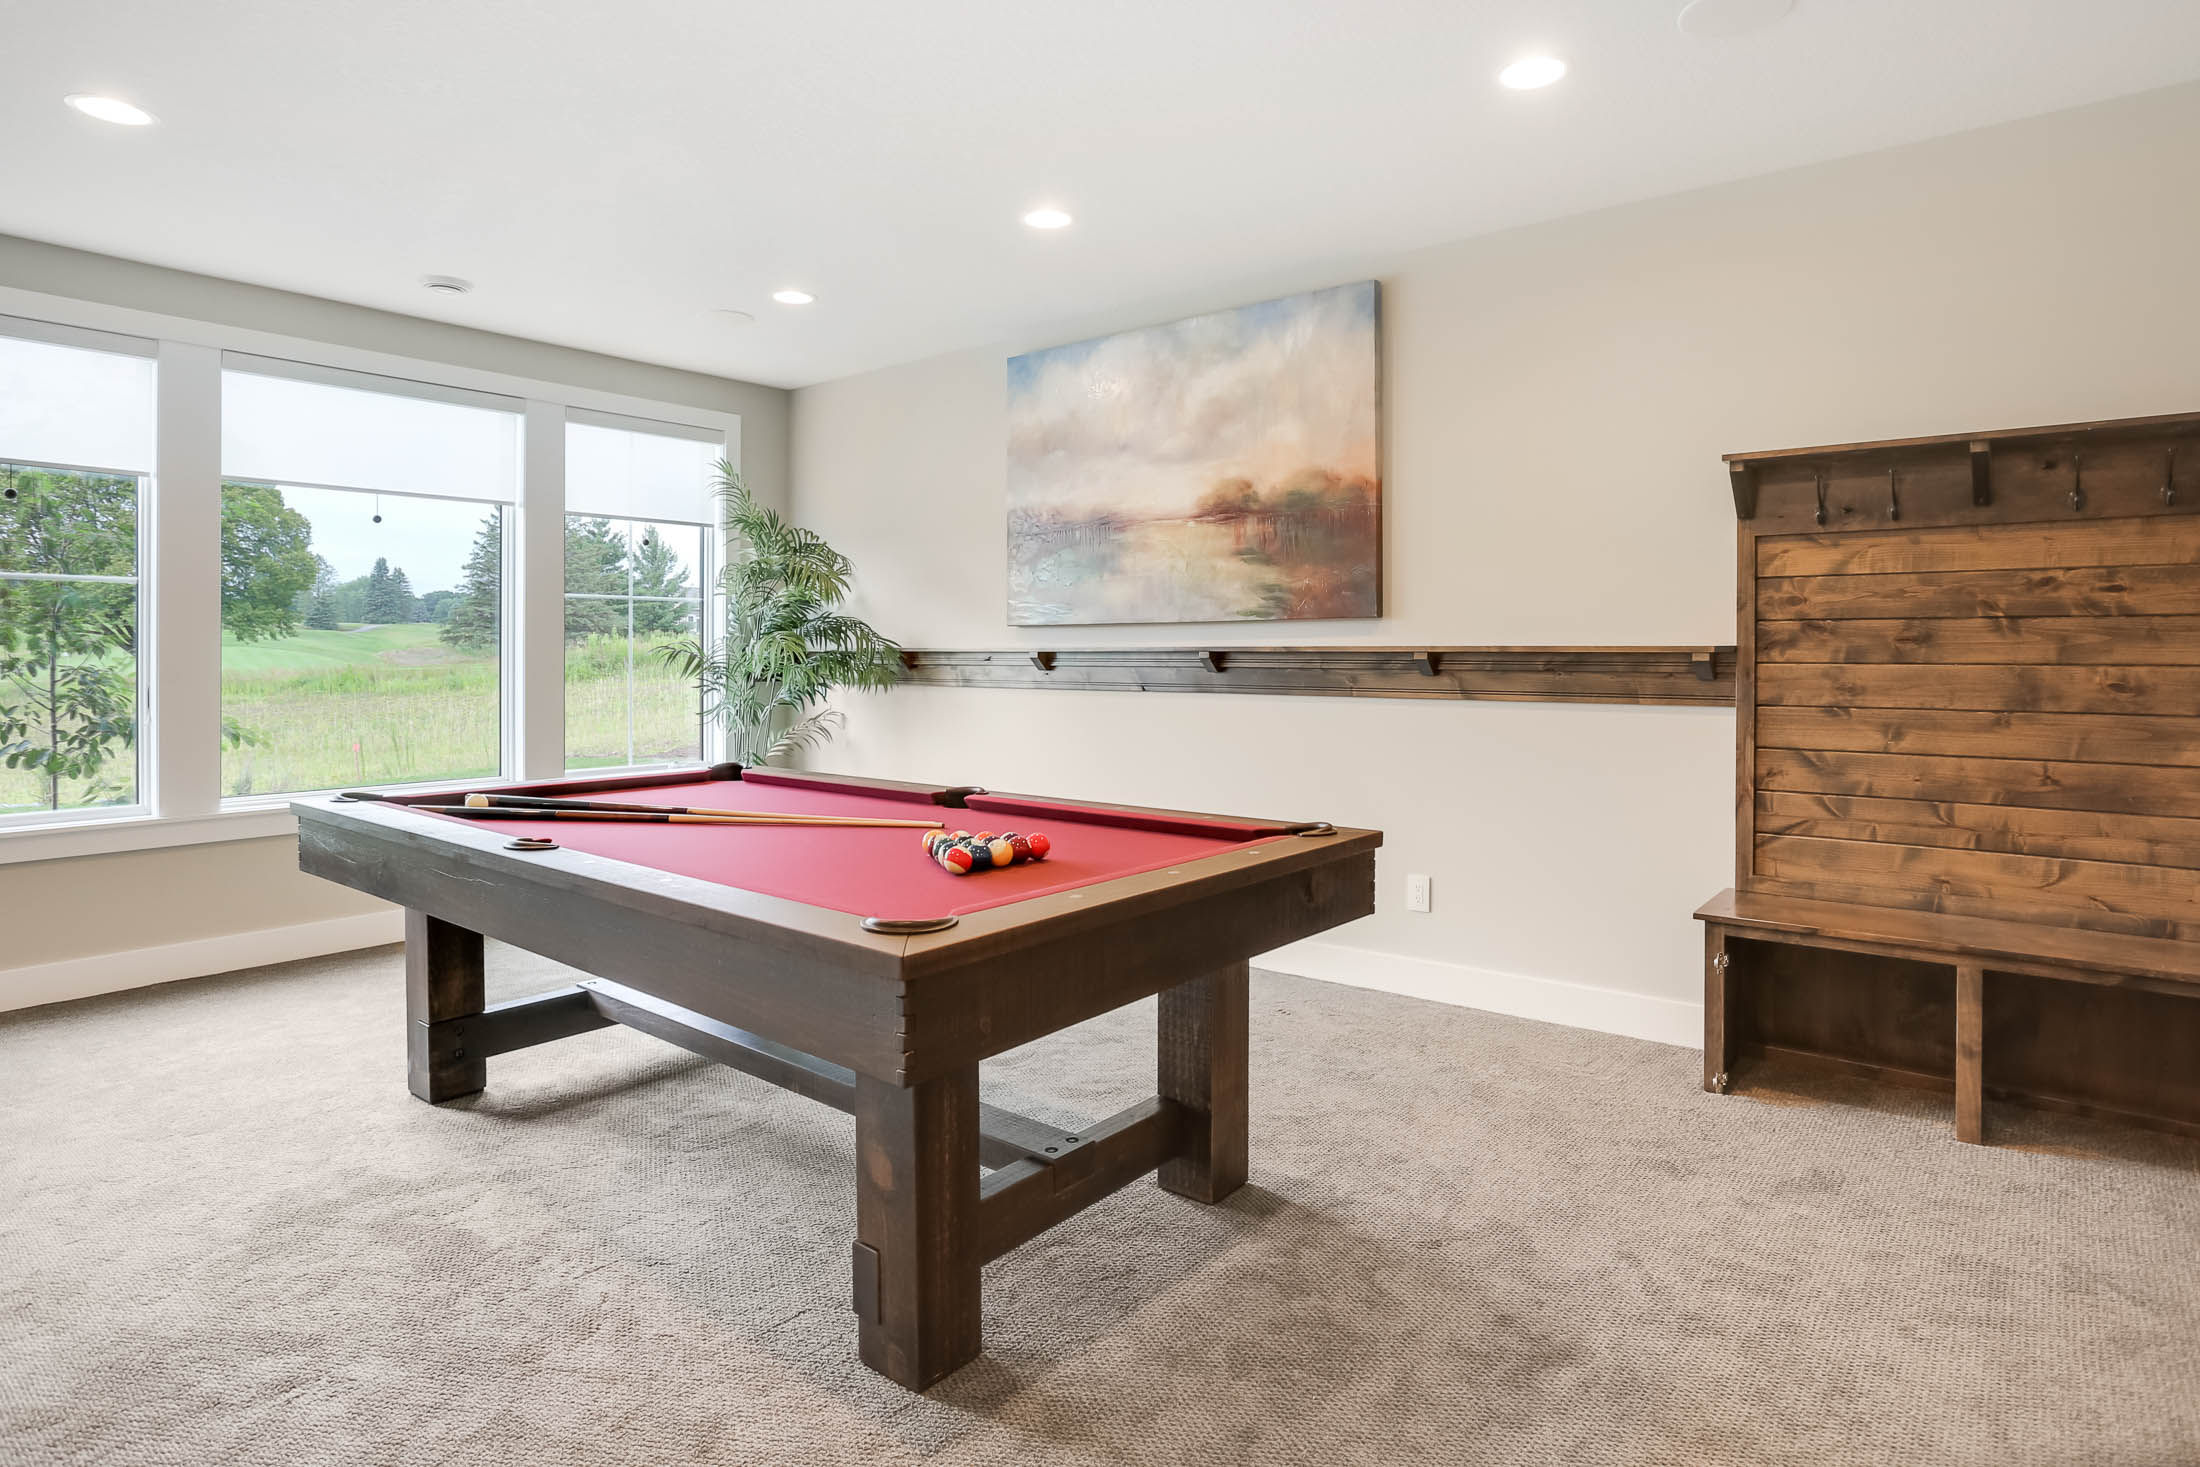 Pool table game area with a view